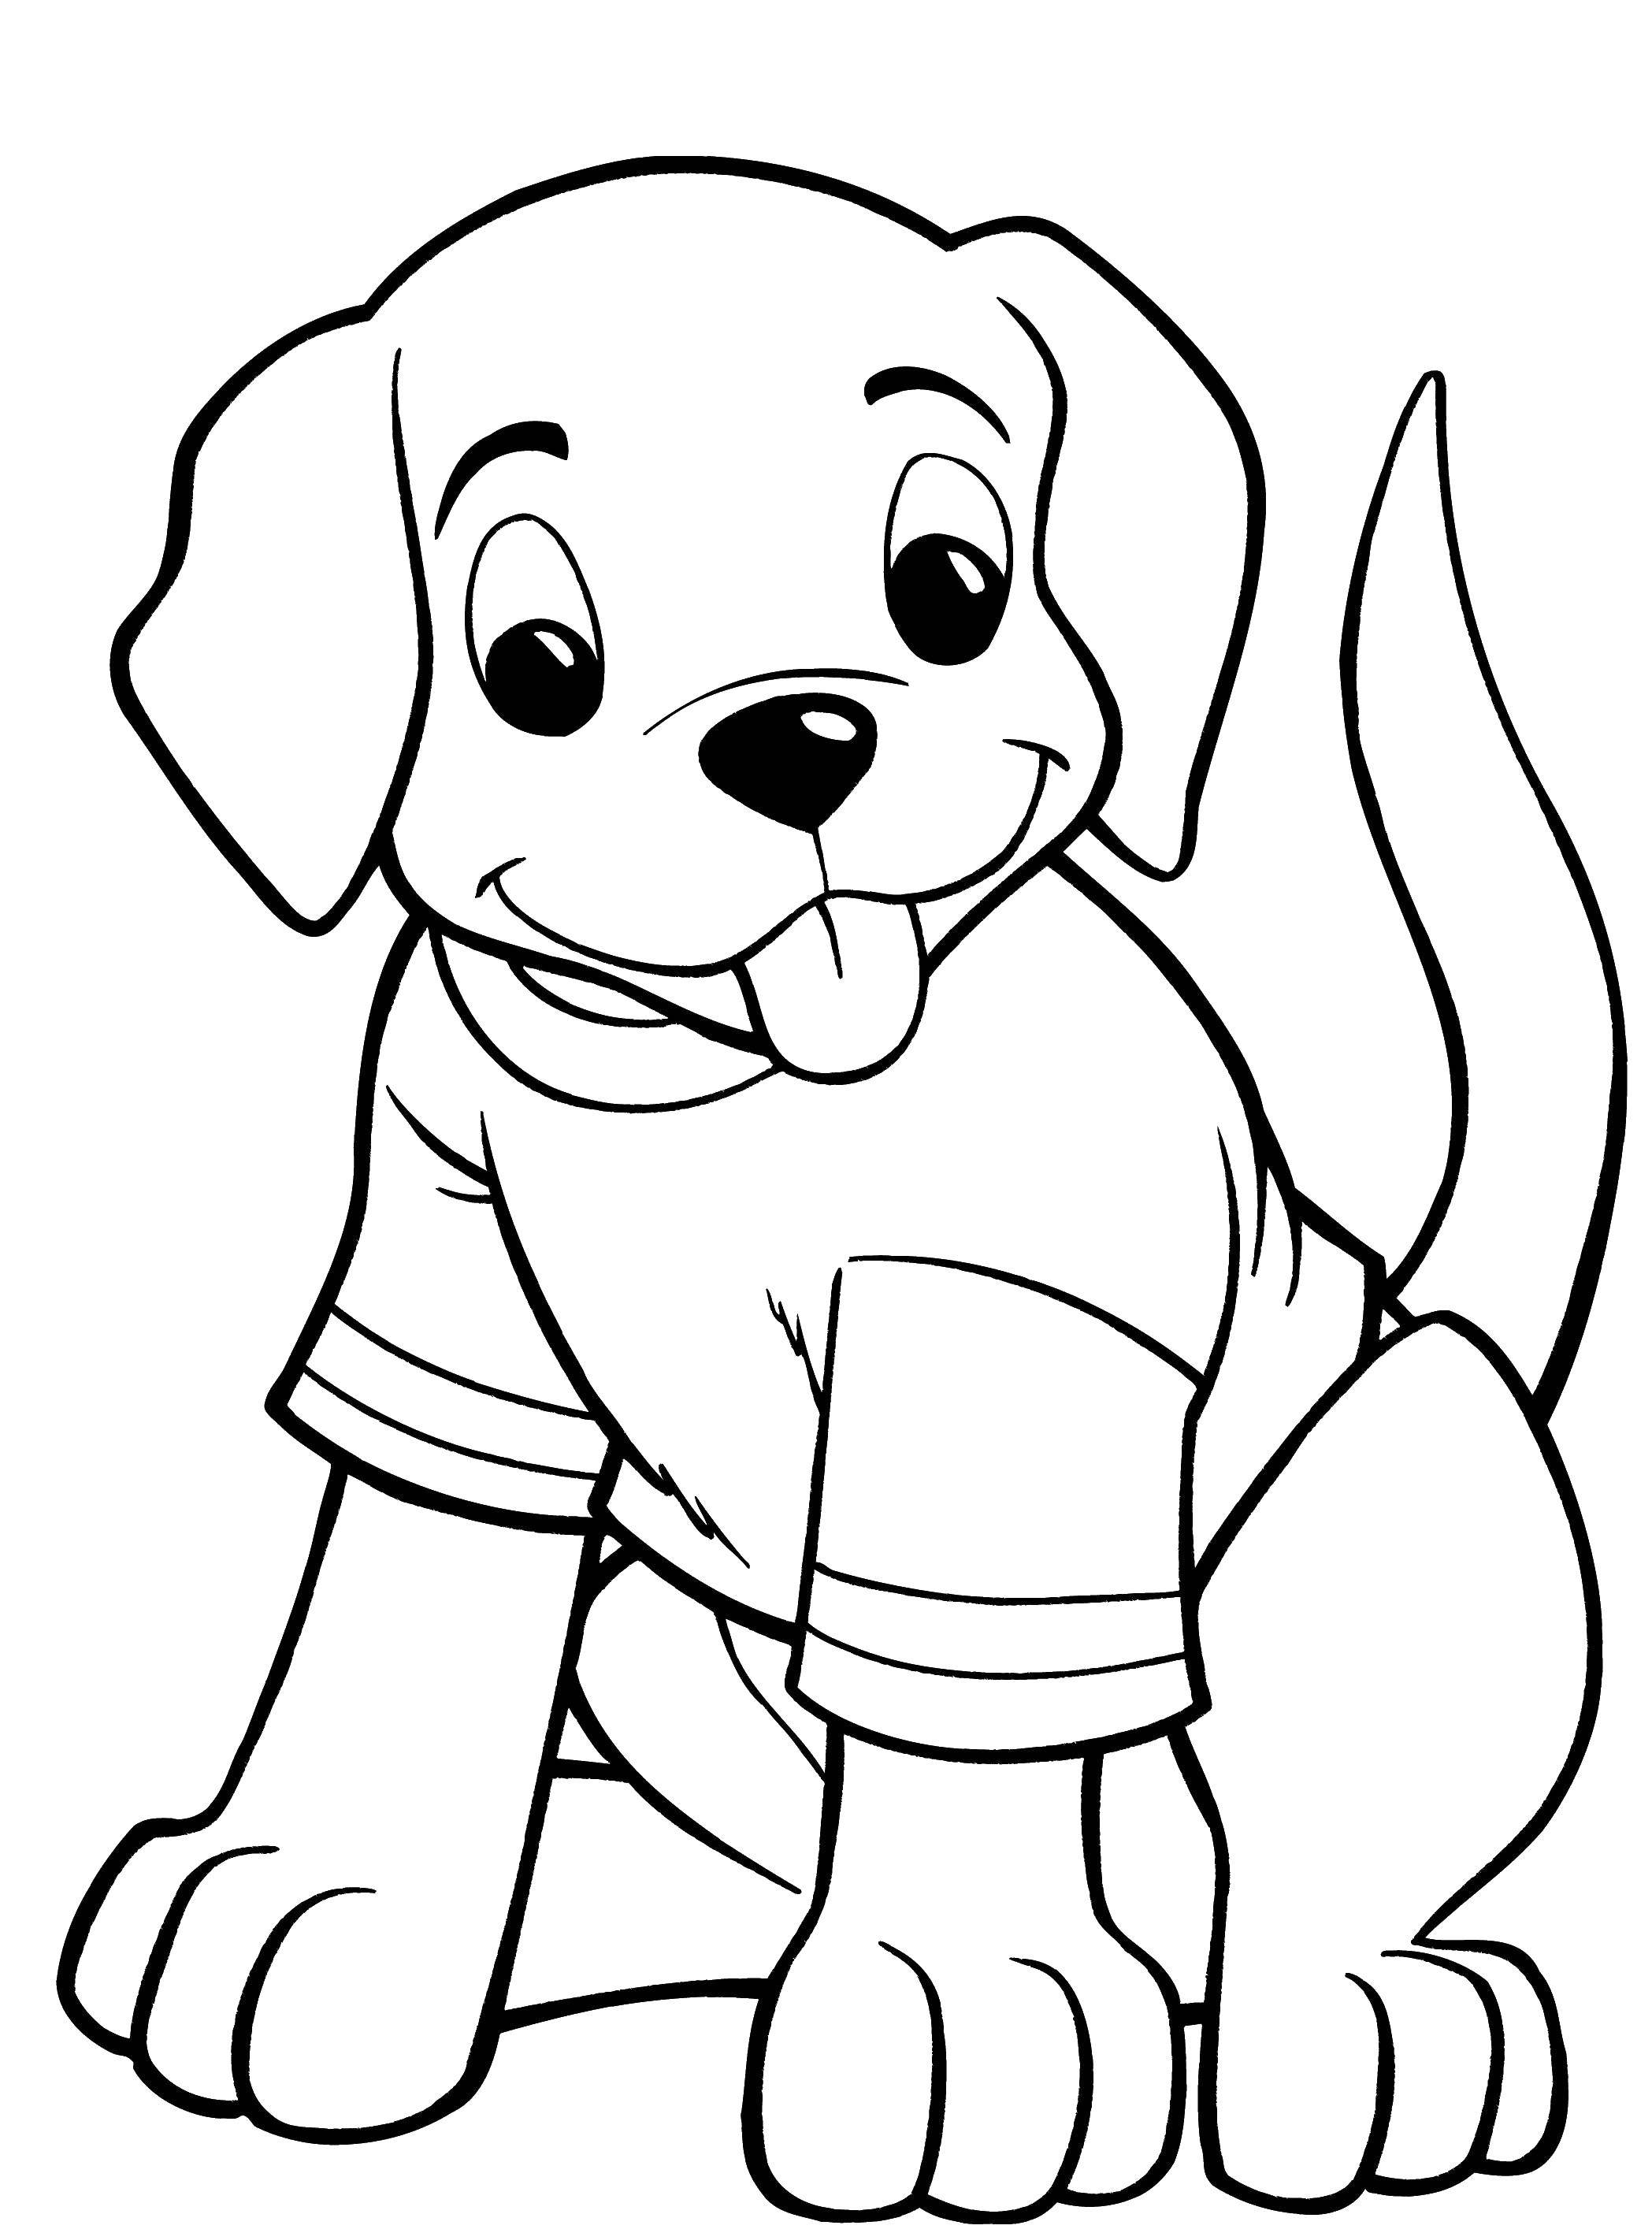 Coloring Puppy t-shirt. Category Pets allowed. Tags:  animals, dog, puppy.